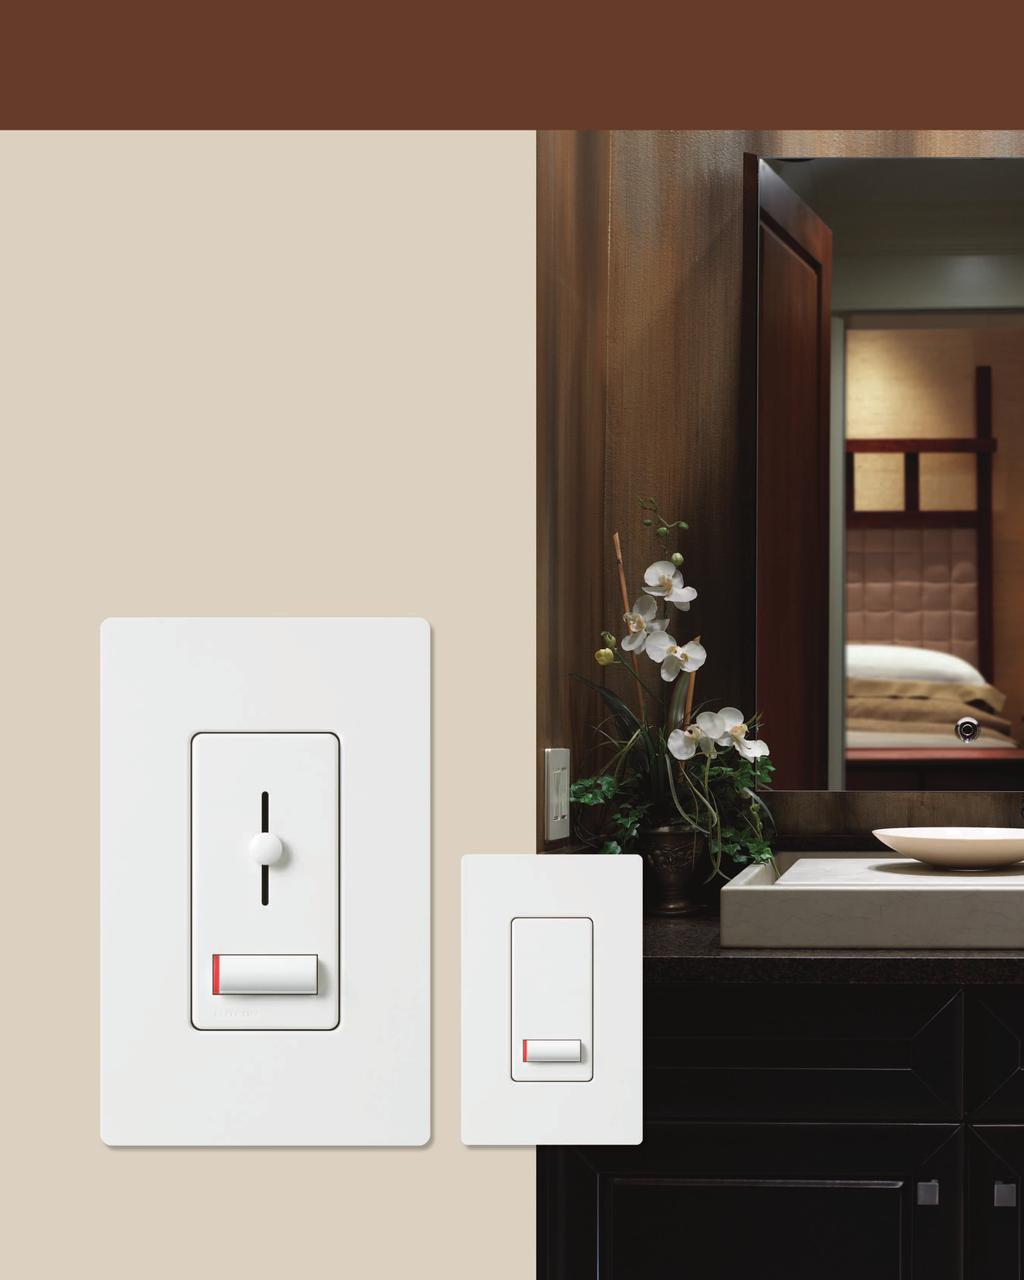 Lutron LyneoTM Lx slide dimmers and switches Lyneo Lx Slide Dimmers Family of intuitive slide dimmers contoured push-button provides large target easily turn lights on/off Round slider adjusts